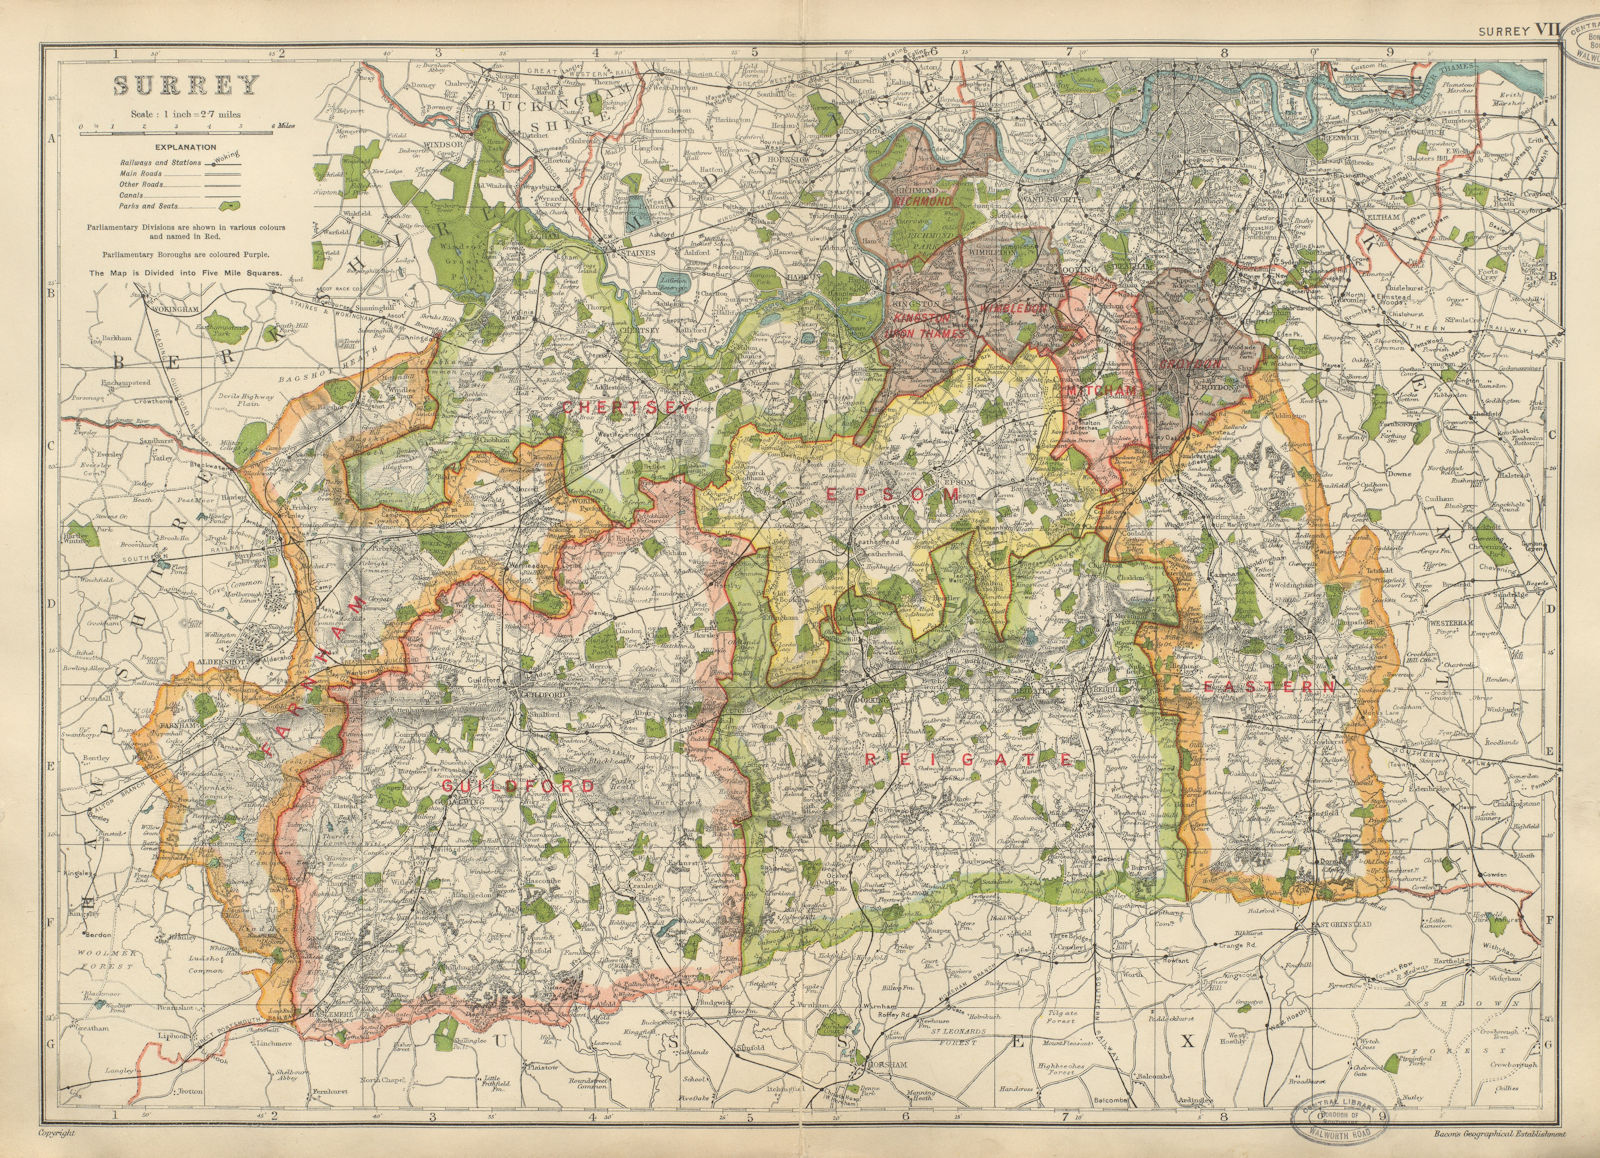 SURREY. Showing Parliamentary divisions, parks & boroughs. BACON 1934 old map